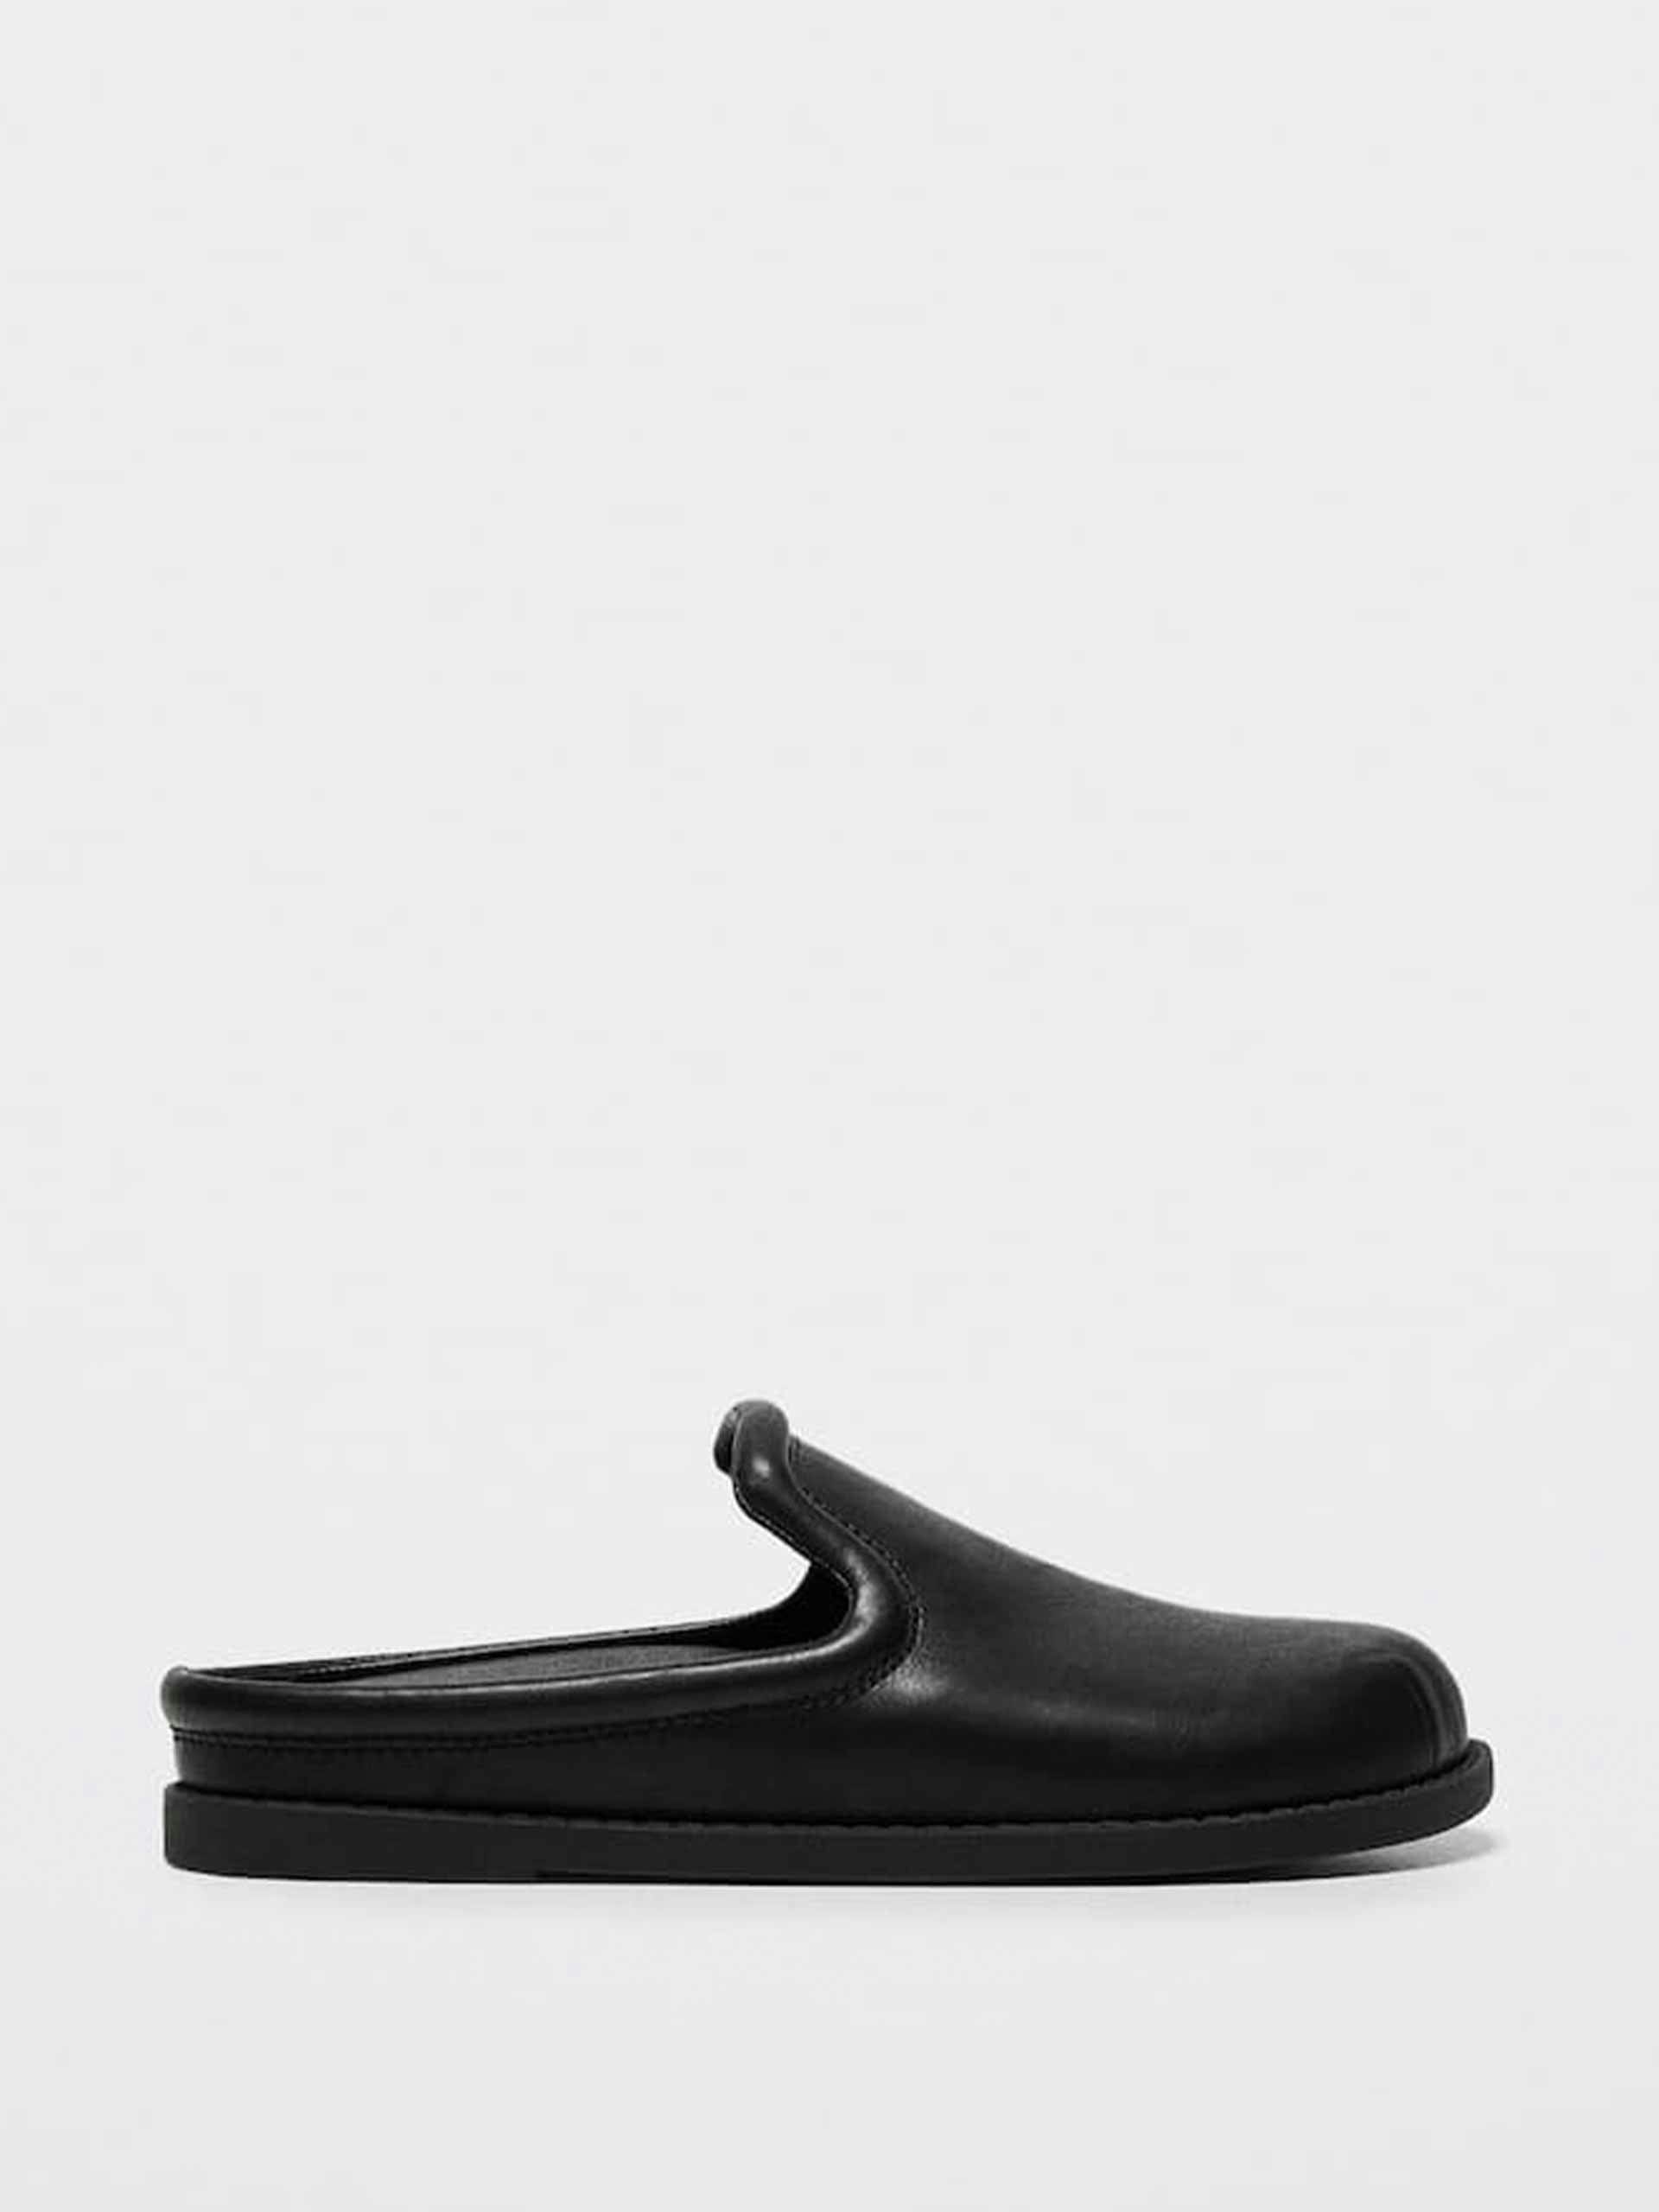 Leather effect black clogs